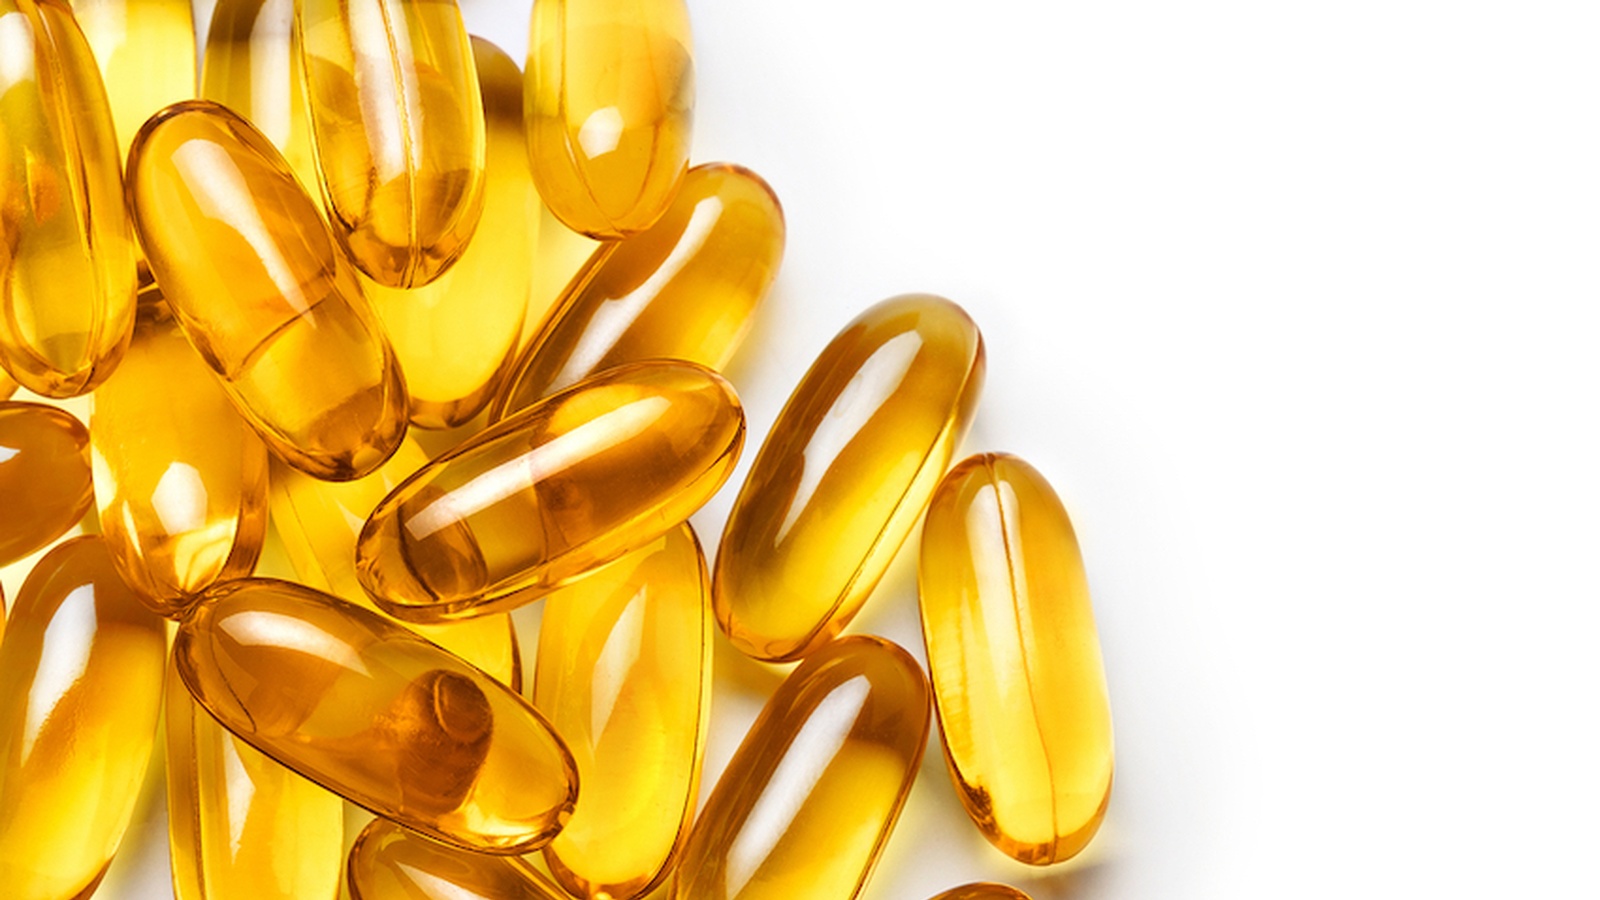 Can Omega-3 Help Treat Your Depression? 